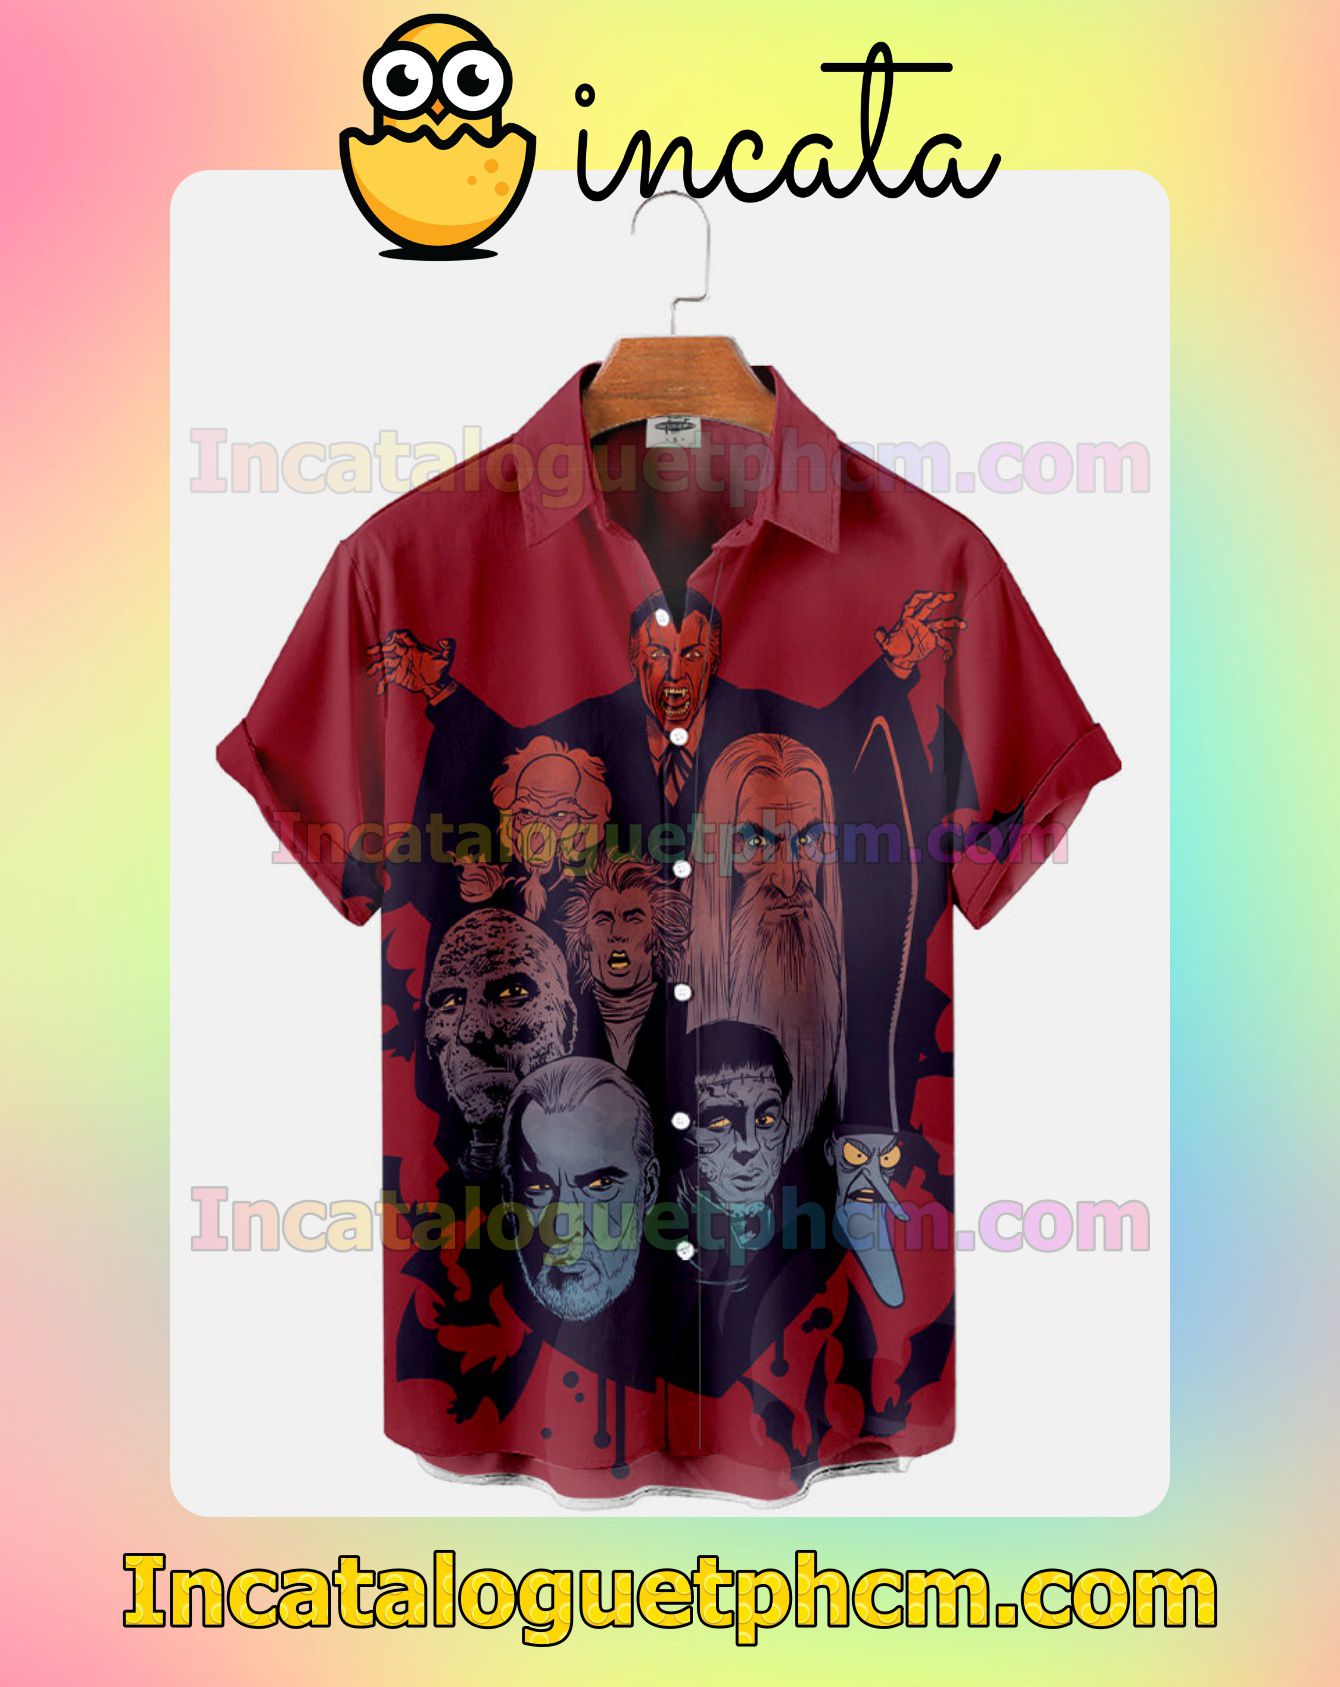 Prince Of Darkness - Christopher Lee Tribute Halloween Idea Shirt